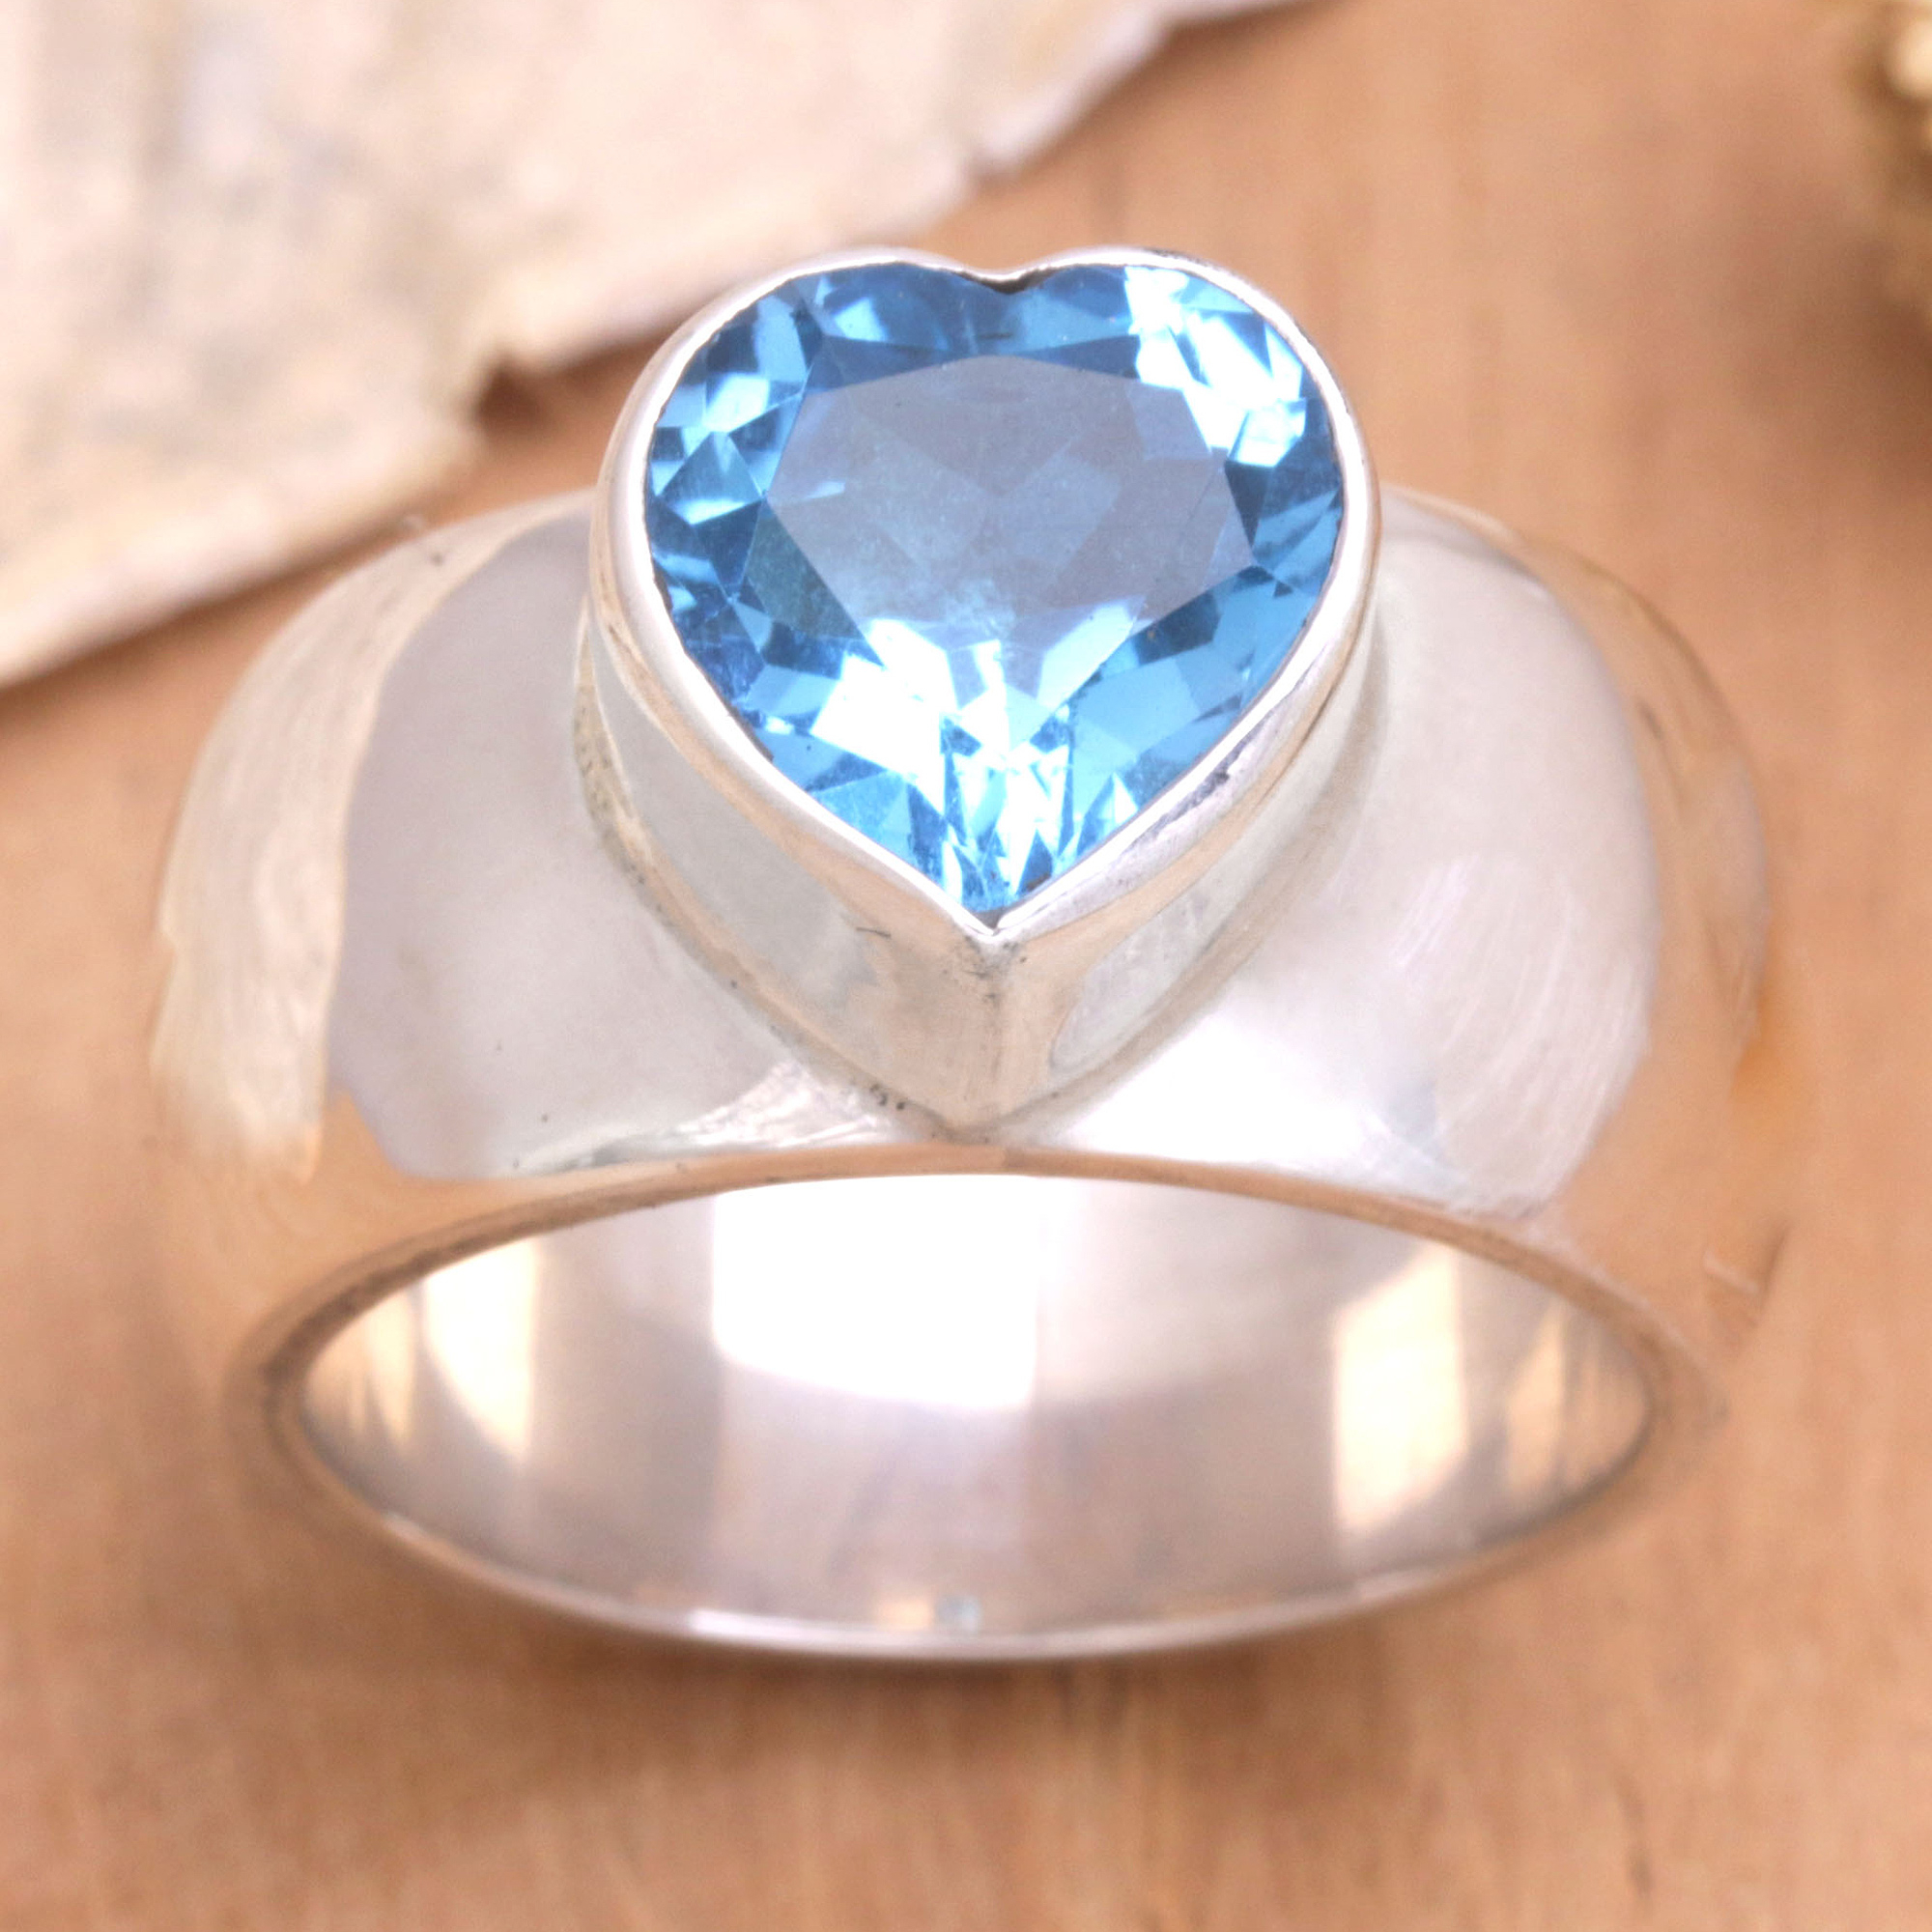 Heart Shaped Sterling Silver and Blue Topaz Ring, 'Heart Voice'